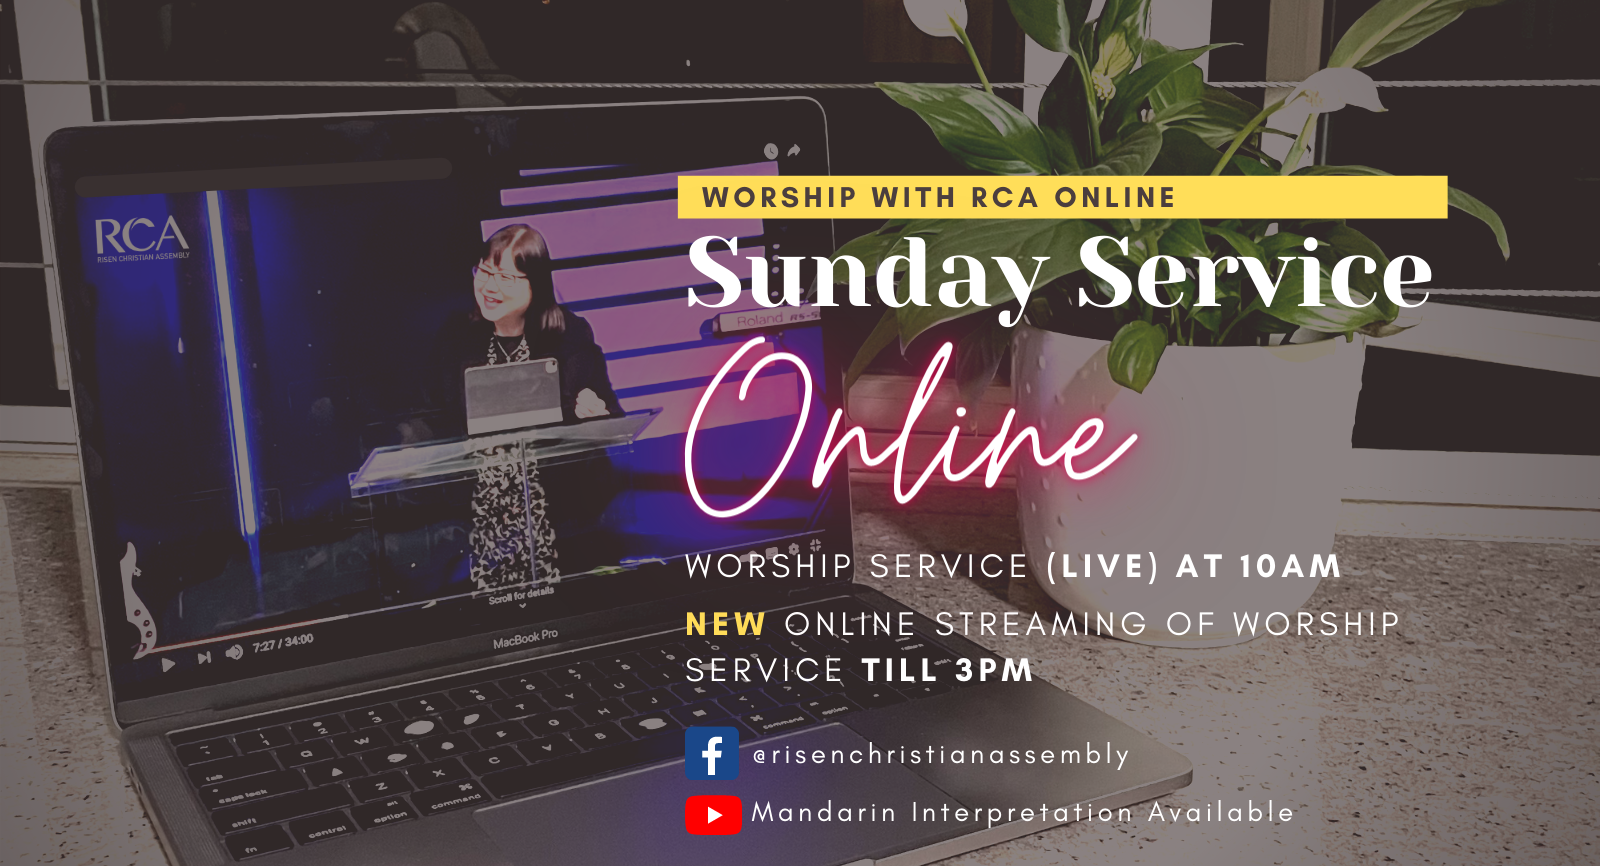 Worship Jesus with RCA at our online service on Sundays.